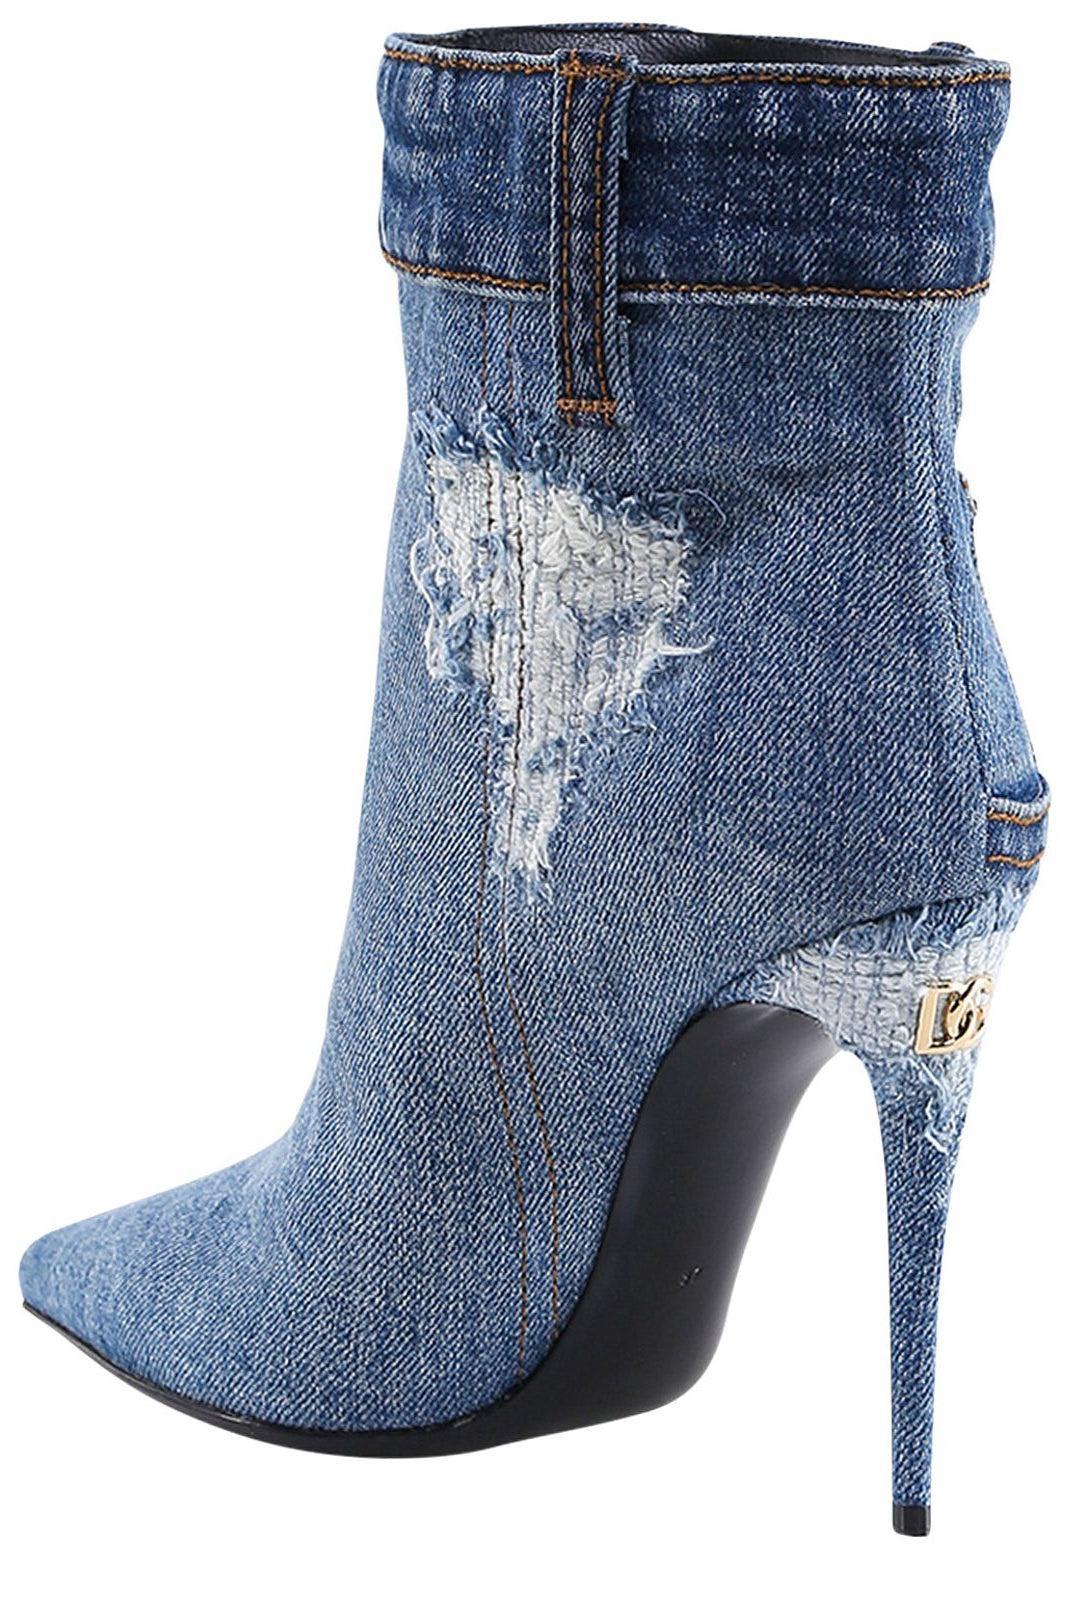 Dolce & Gabbana Denim Patchwork Ankle Boots in Blue | Lyst